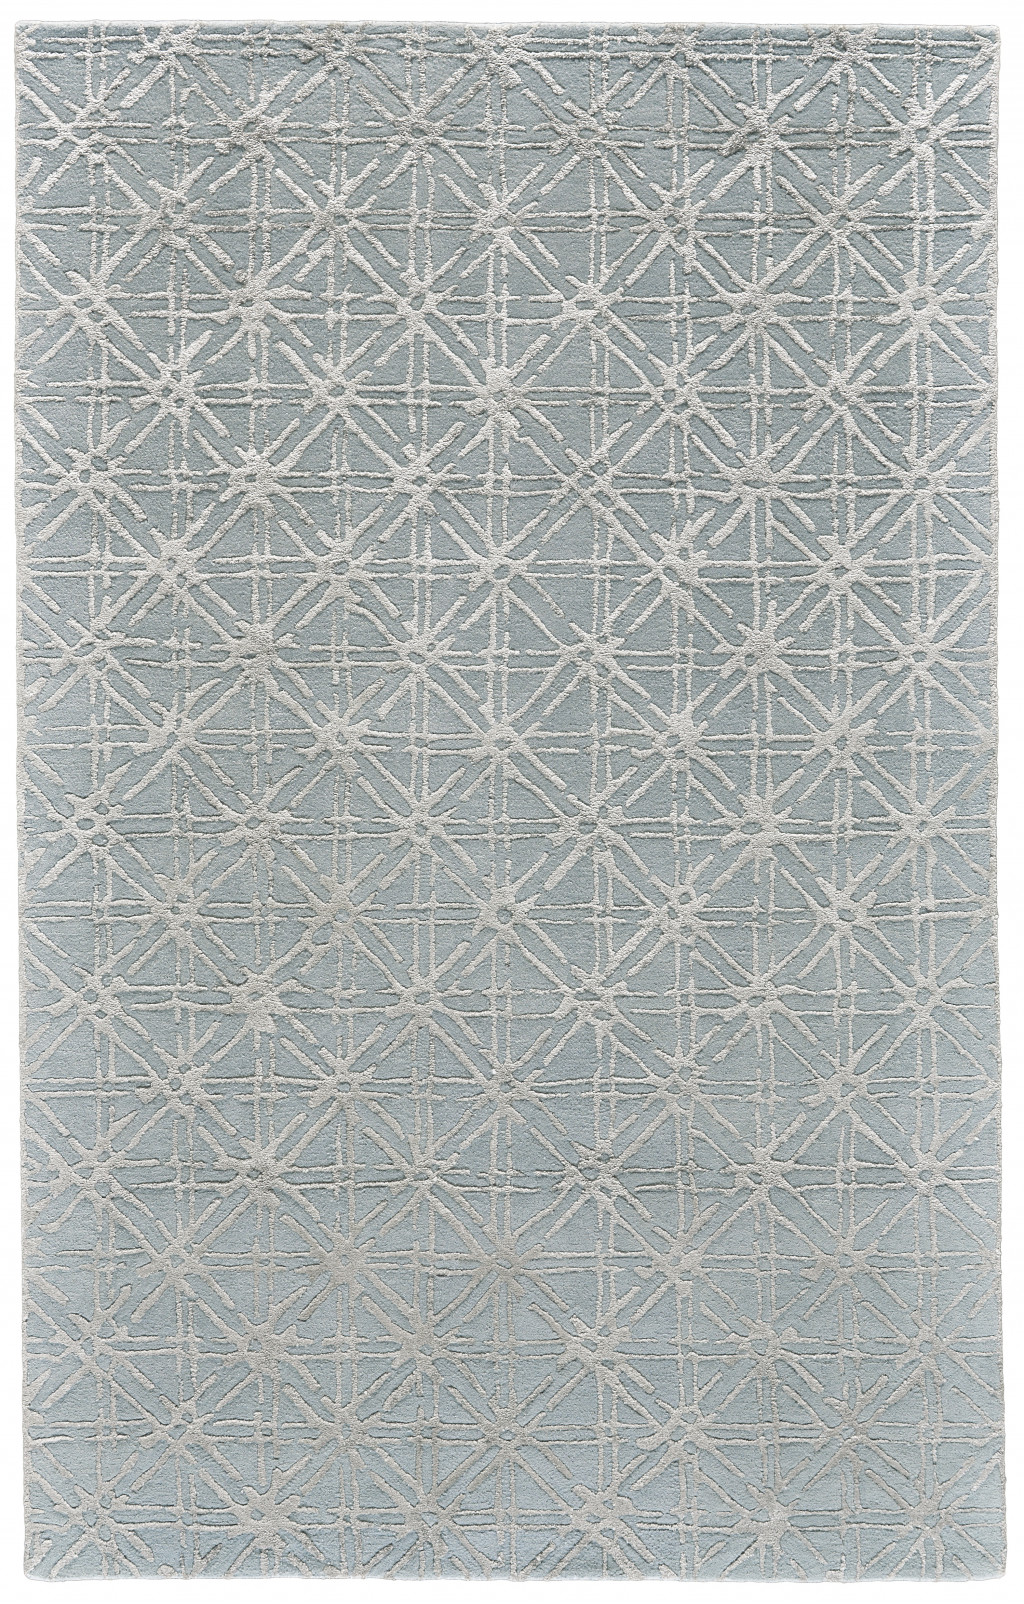 2' X 3' Blue Silver And Gray Wool Abstract Tufted Handmade Area Rug-511598-1